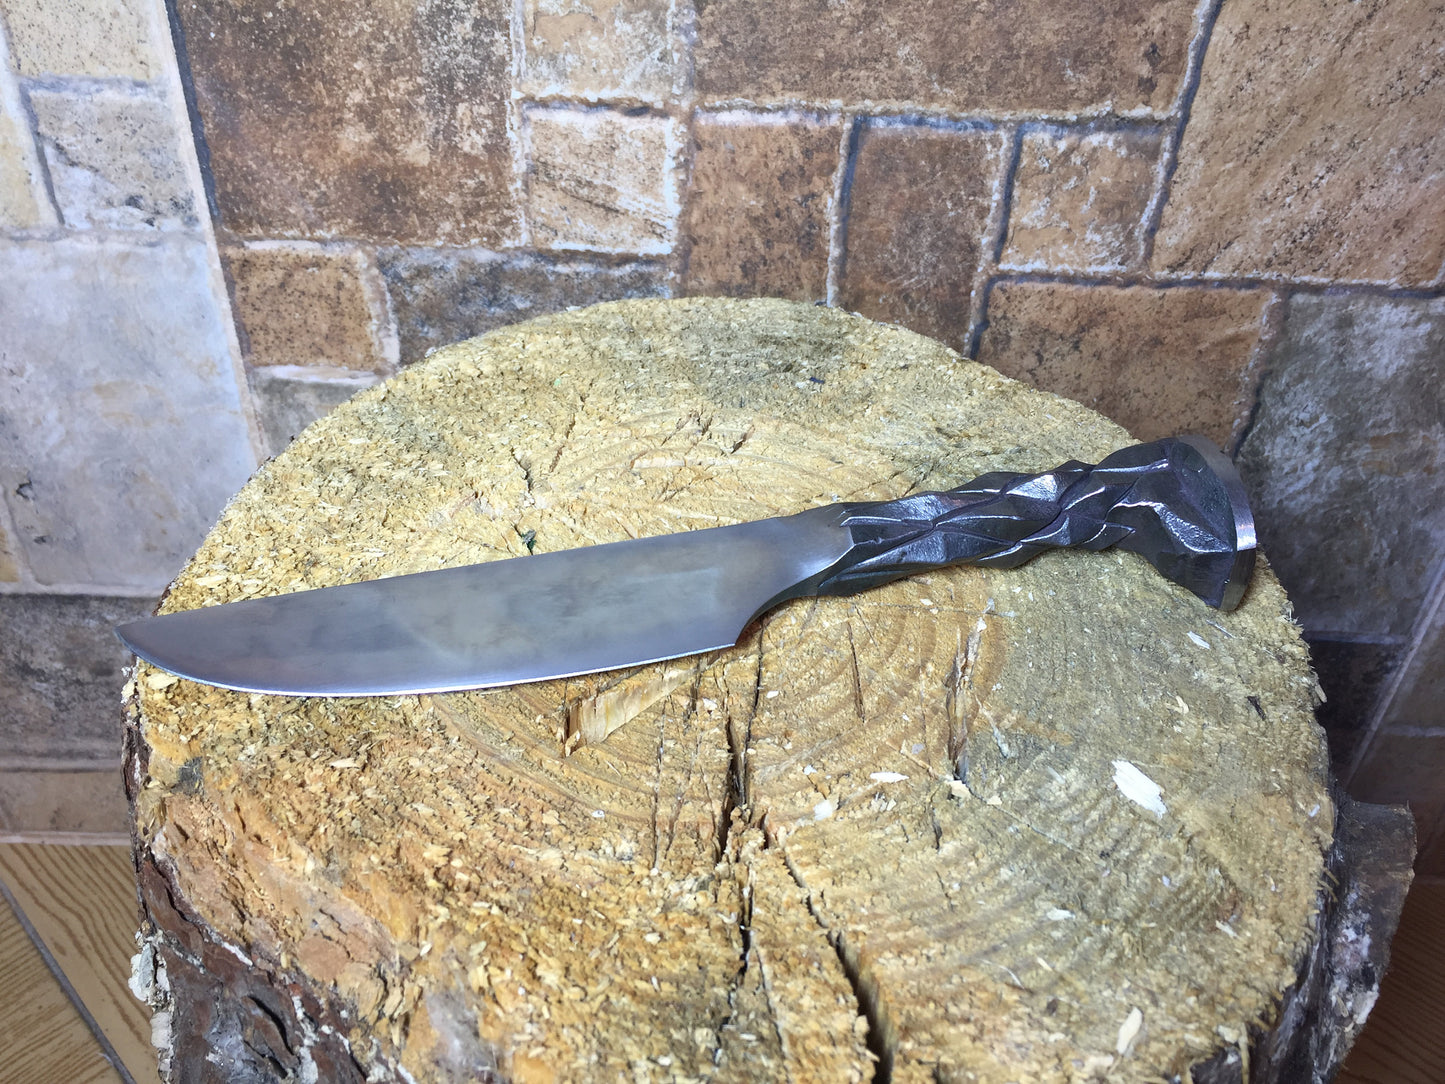 6 year anniversary gift for him, railroad spike knife, steampunk furniture,iron anniversary gift for him,wedding anniversary gift,iron knife